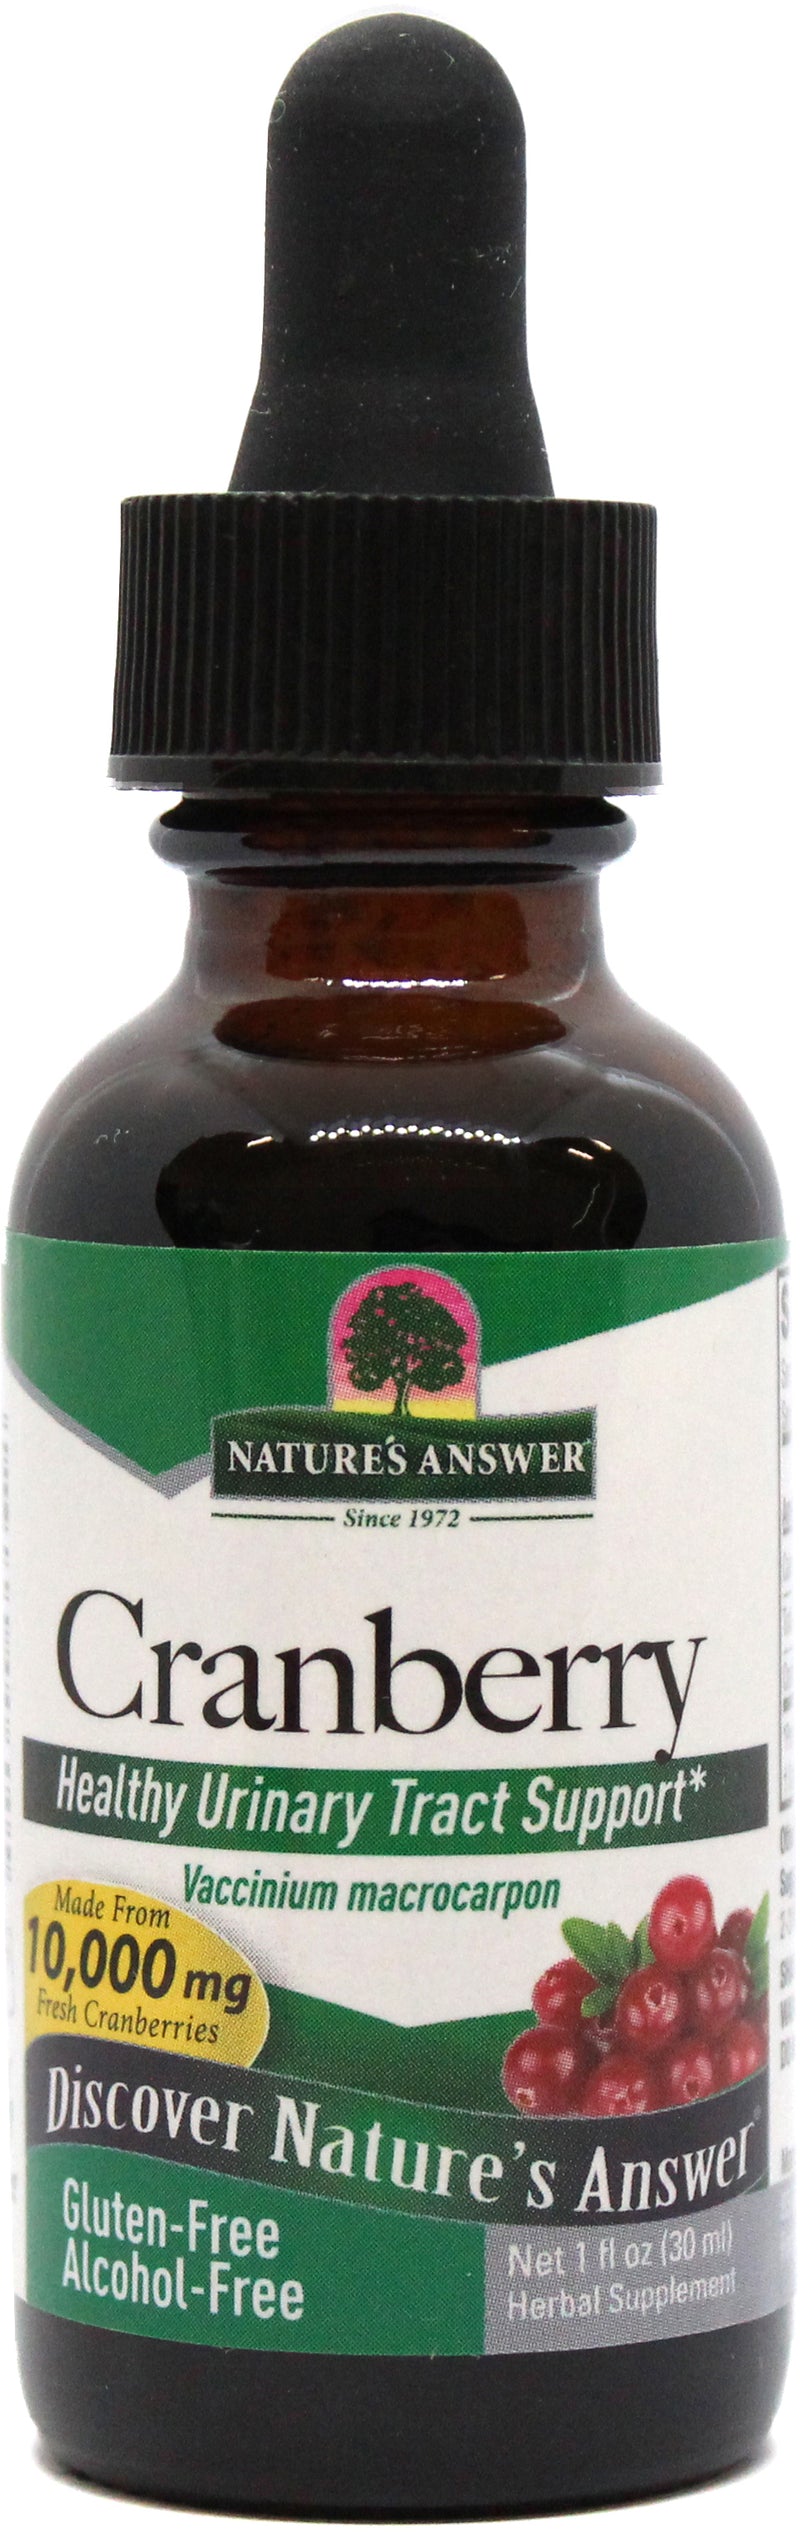 Nature’s Answer Cranberry (Alcohol-Free)